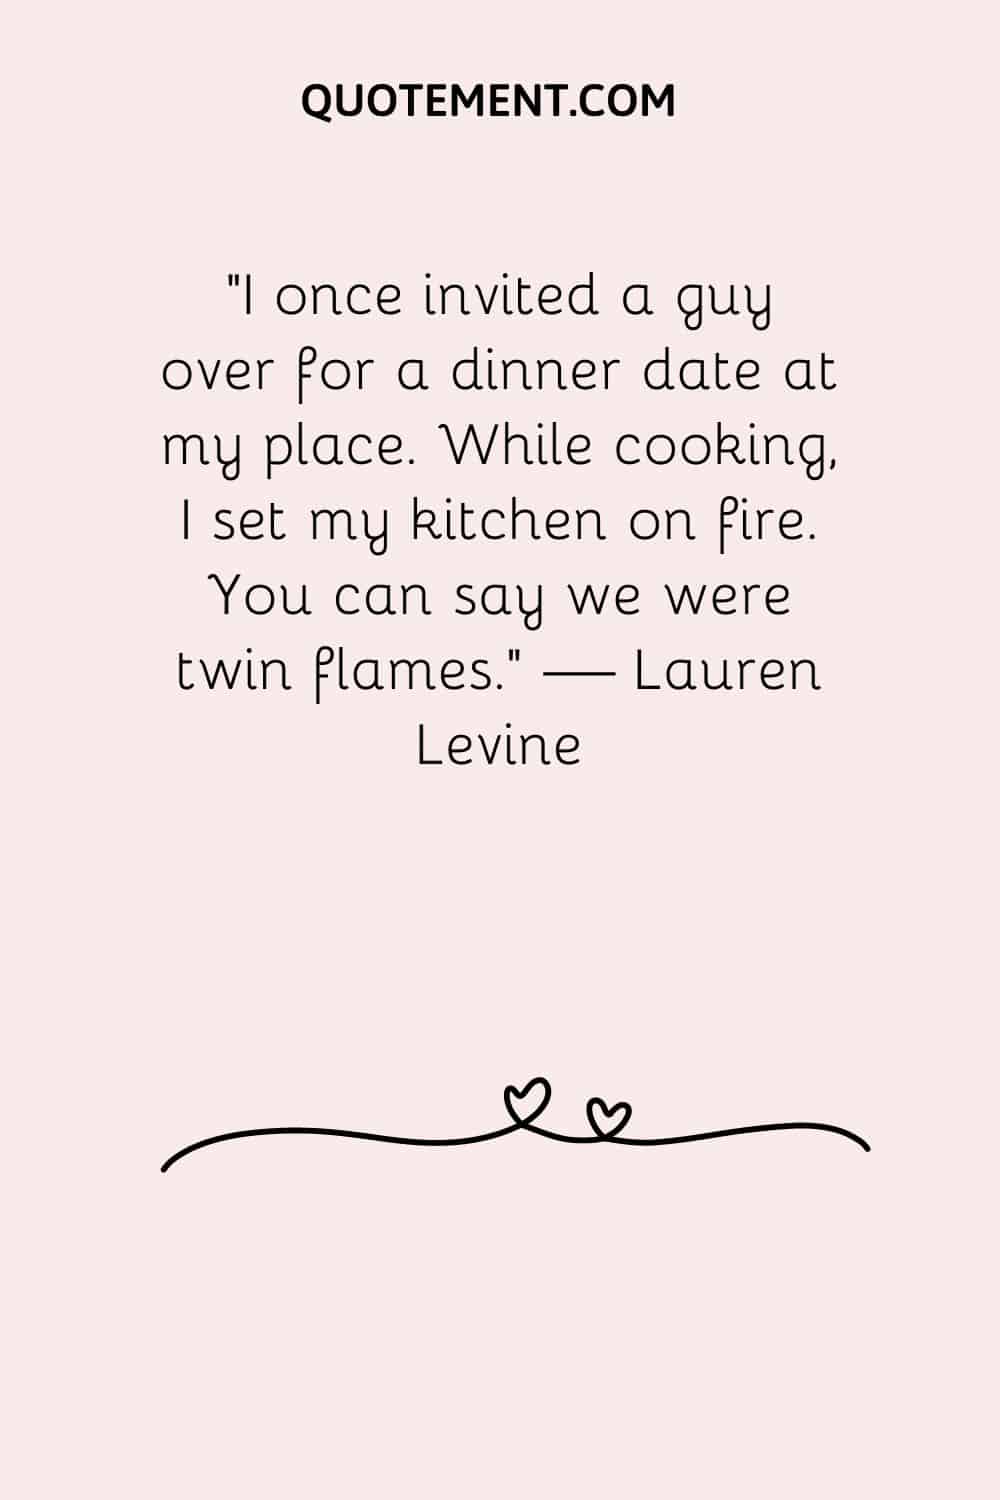 I once invited a guy over for a dinner date at my place.